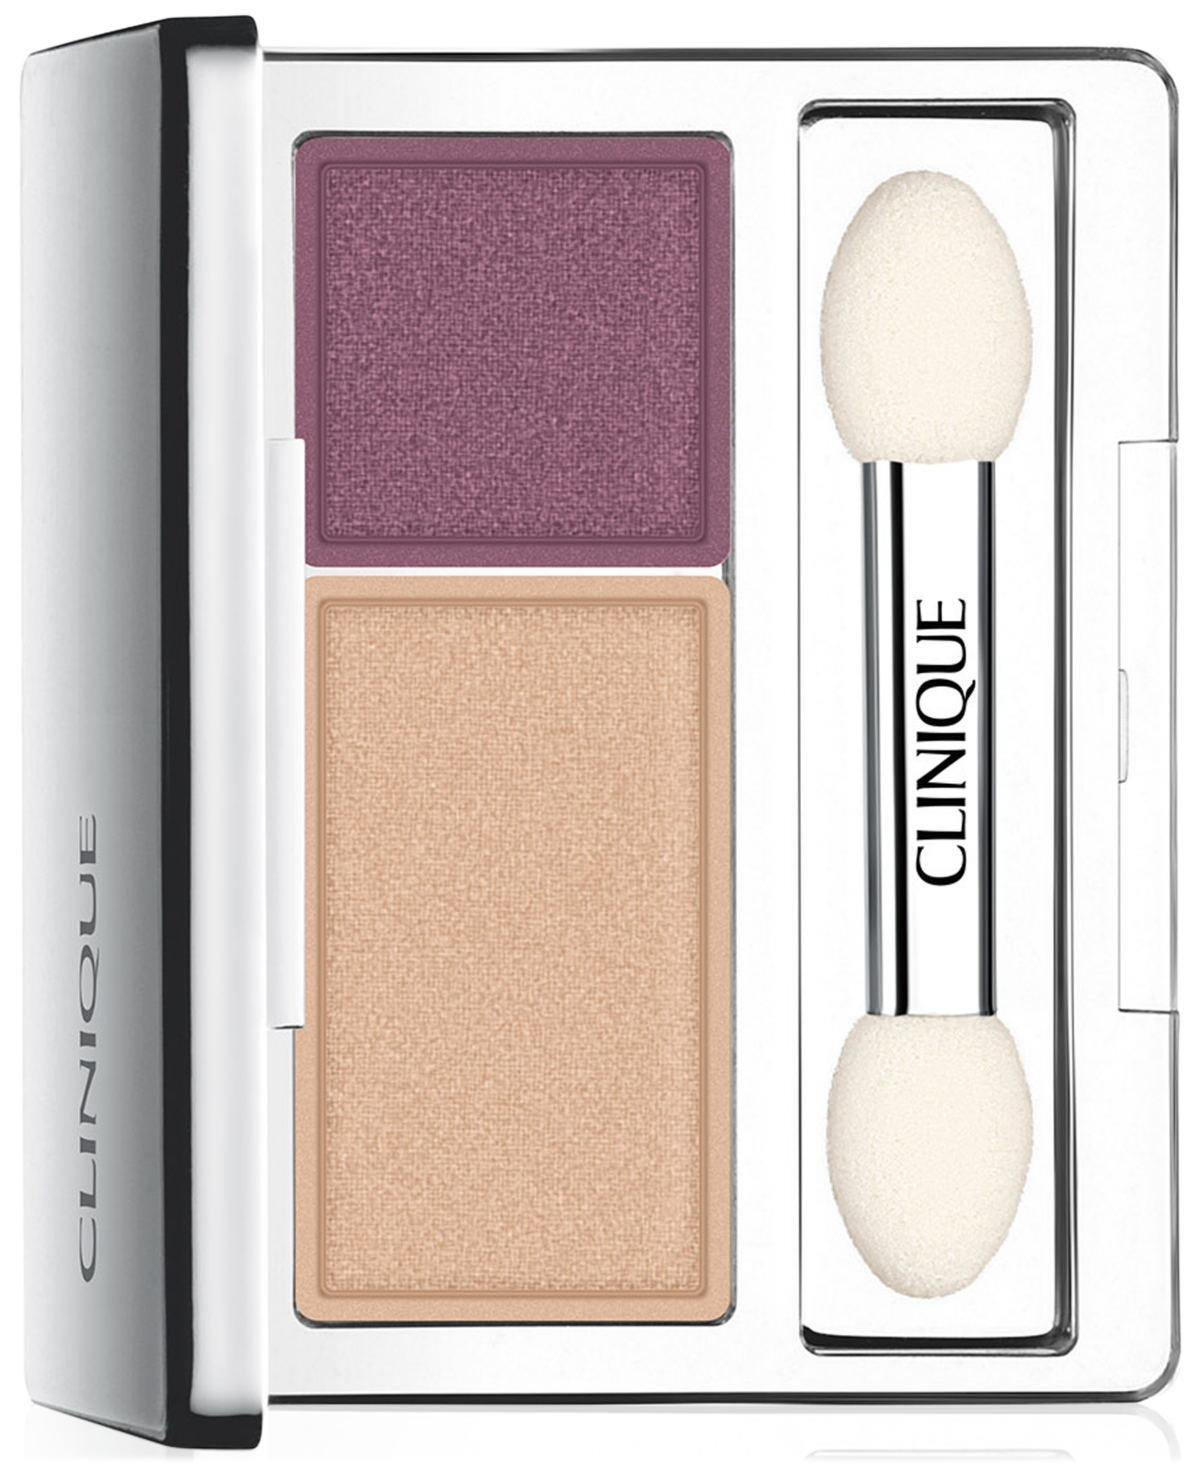 Clinique All About Shadow Duo Eyeshadow, 0.12 Oz. In Beach Plum